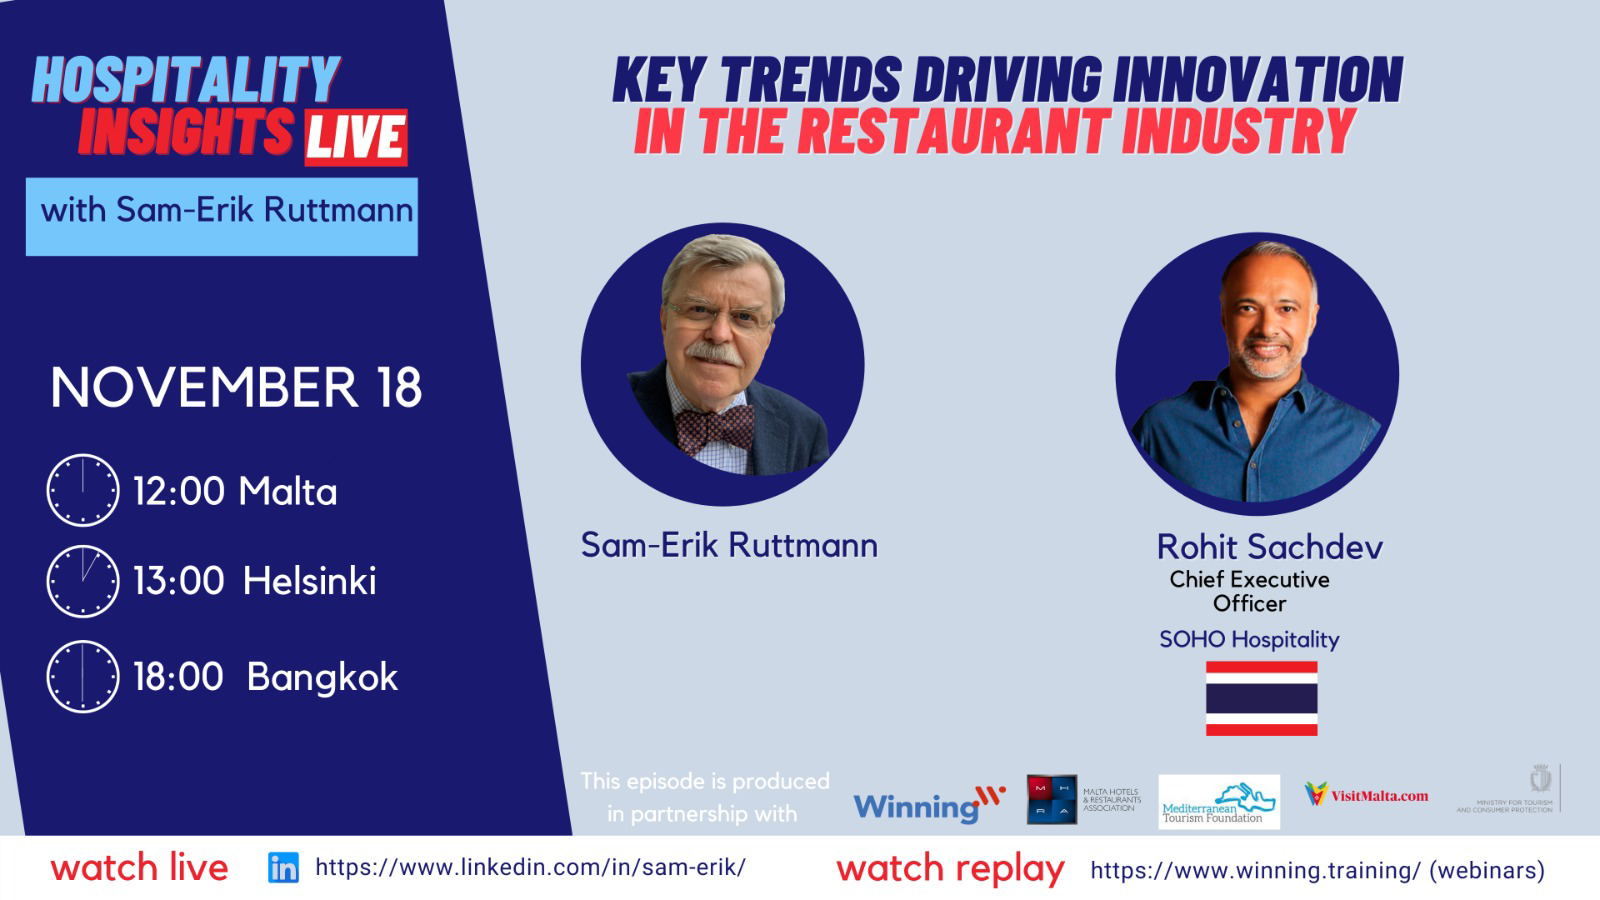 Key trends driving innovation in the restaurant industry